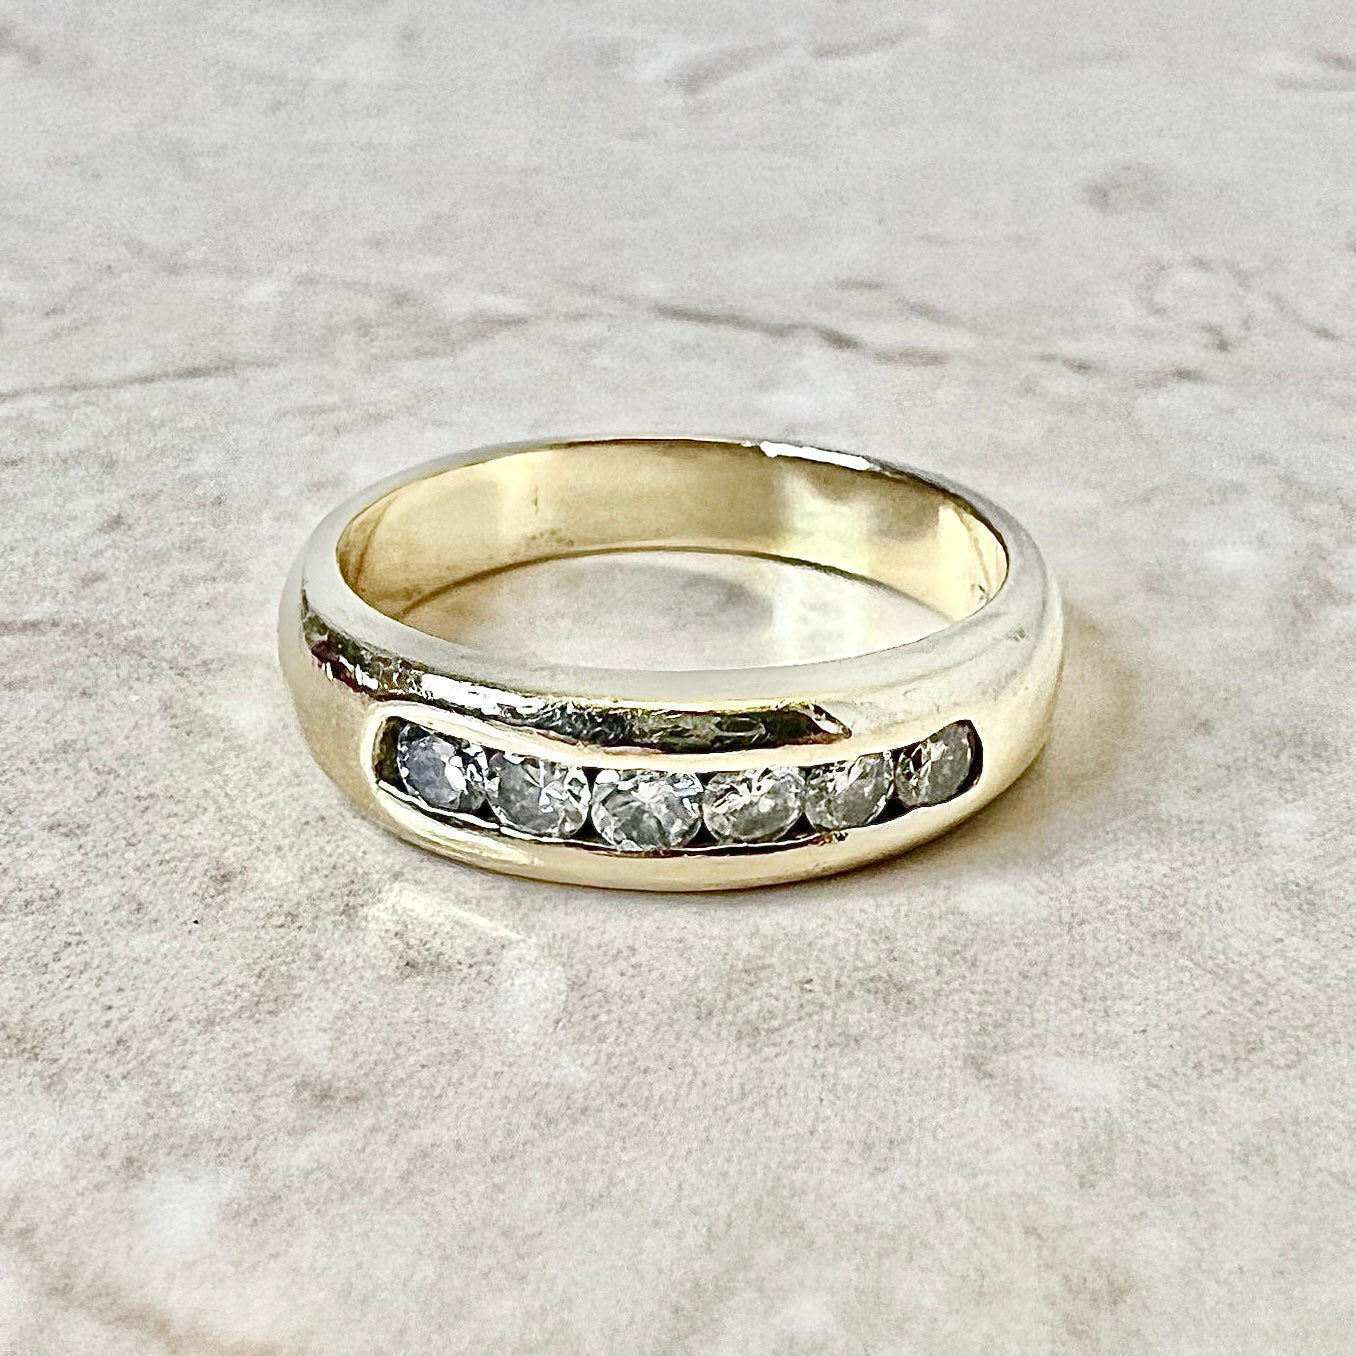 6 Stone Diamond Band Crafted In 14 Karat Yellow Gold Half Eternity Ring - Wedding Ring - Bridal Jewelry - Anniversary Ring - Holiday Gift